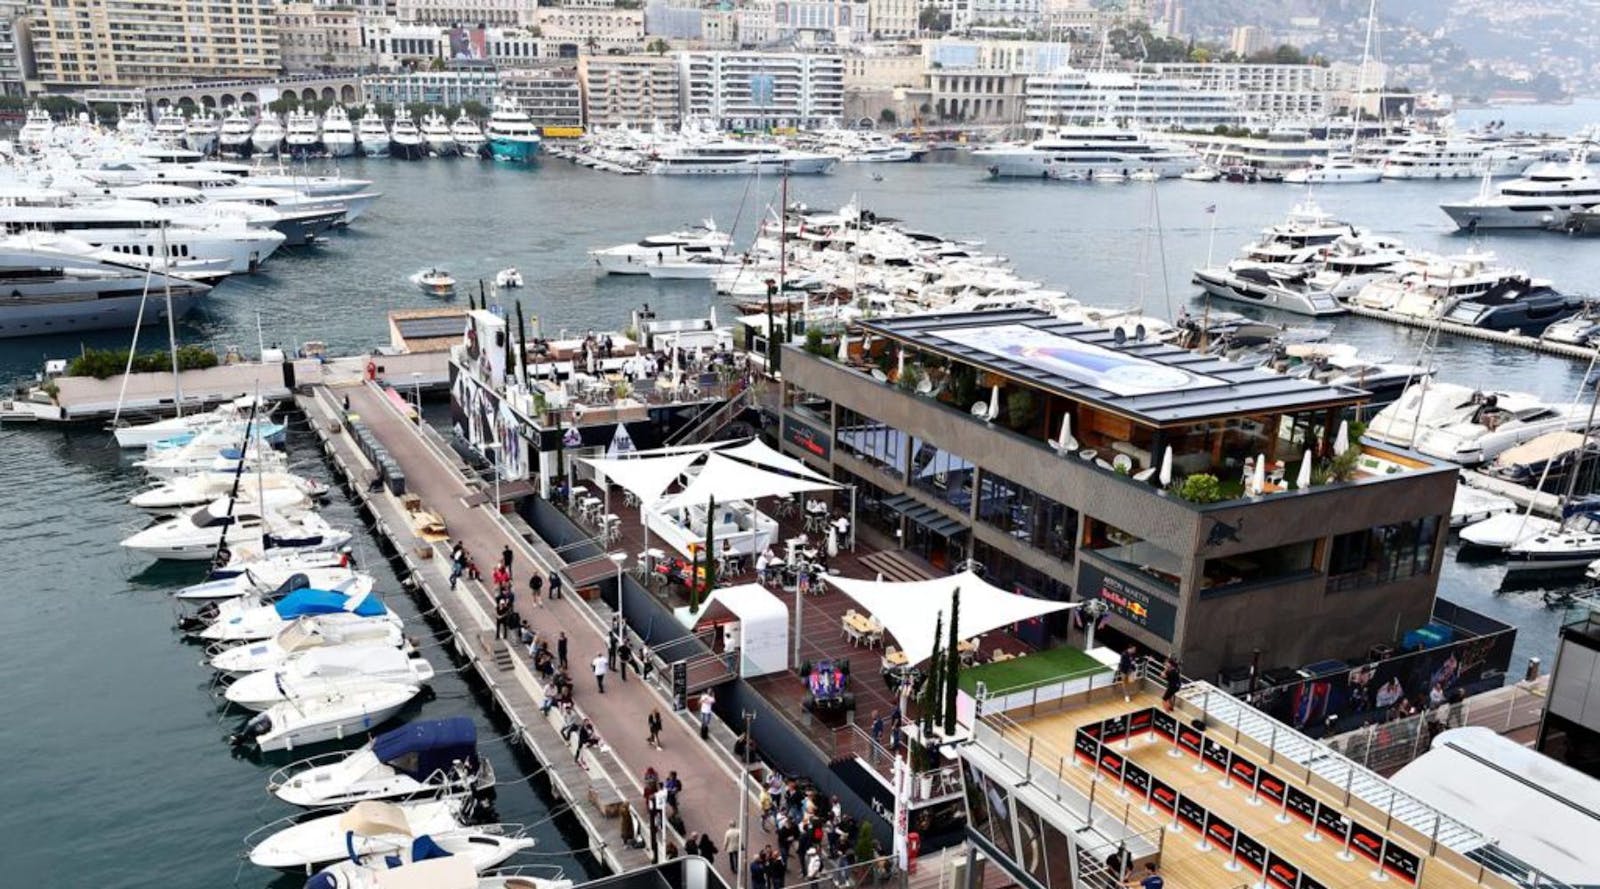 Harbour filled with boats around the floating city for Formula 1. In Monaco, by Aqua events